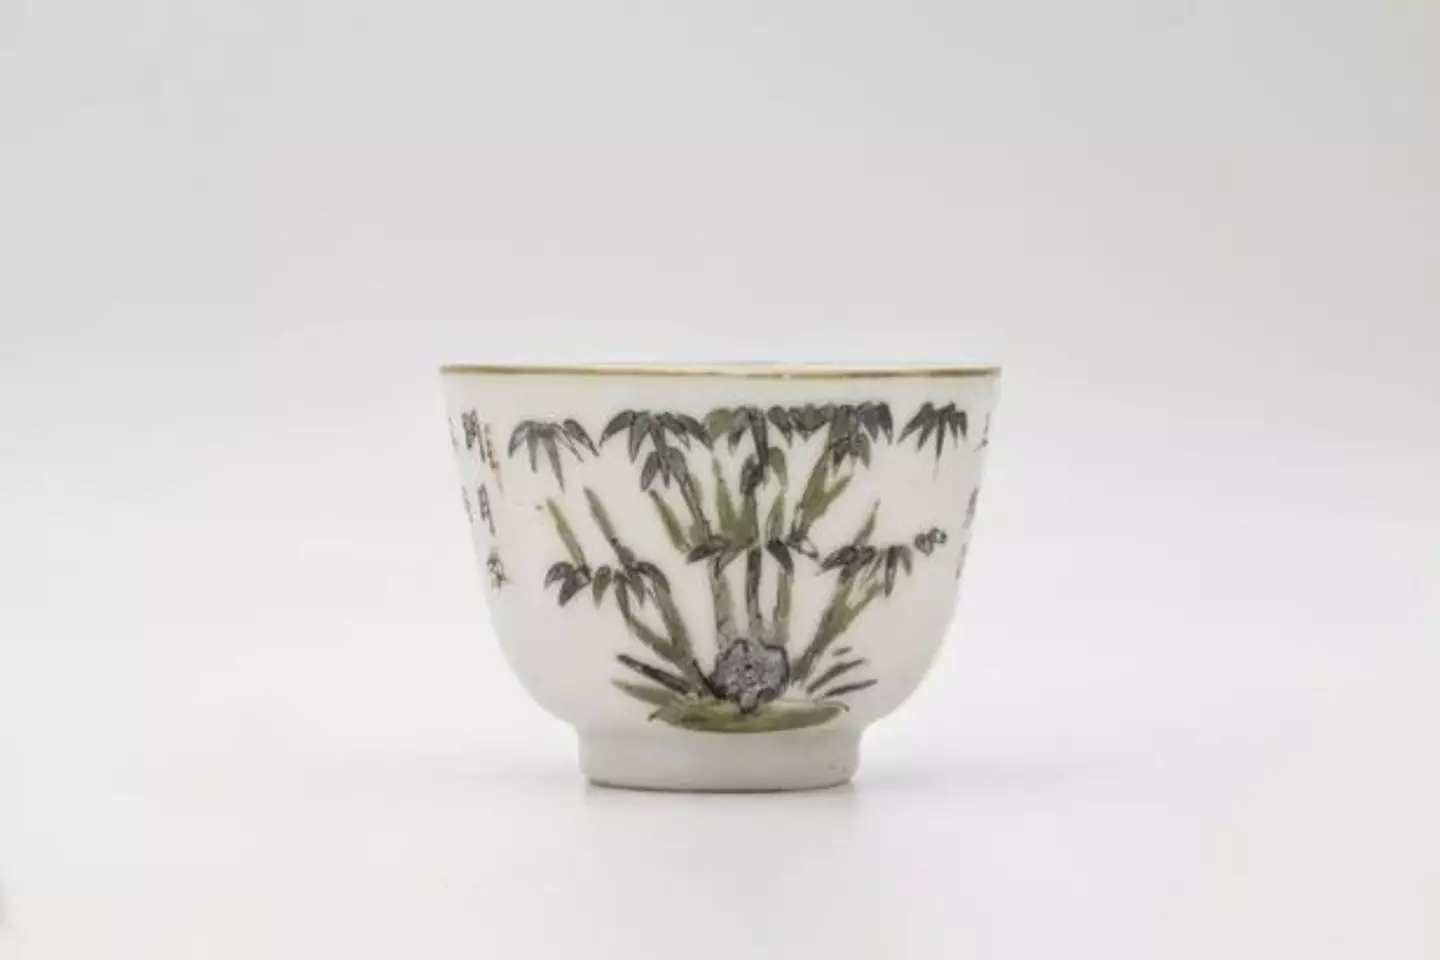 This lovely bowl was also found.